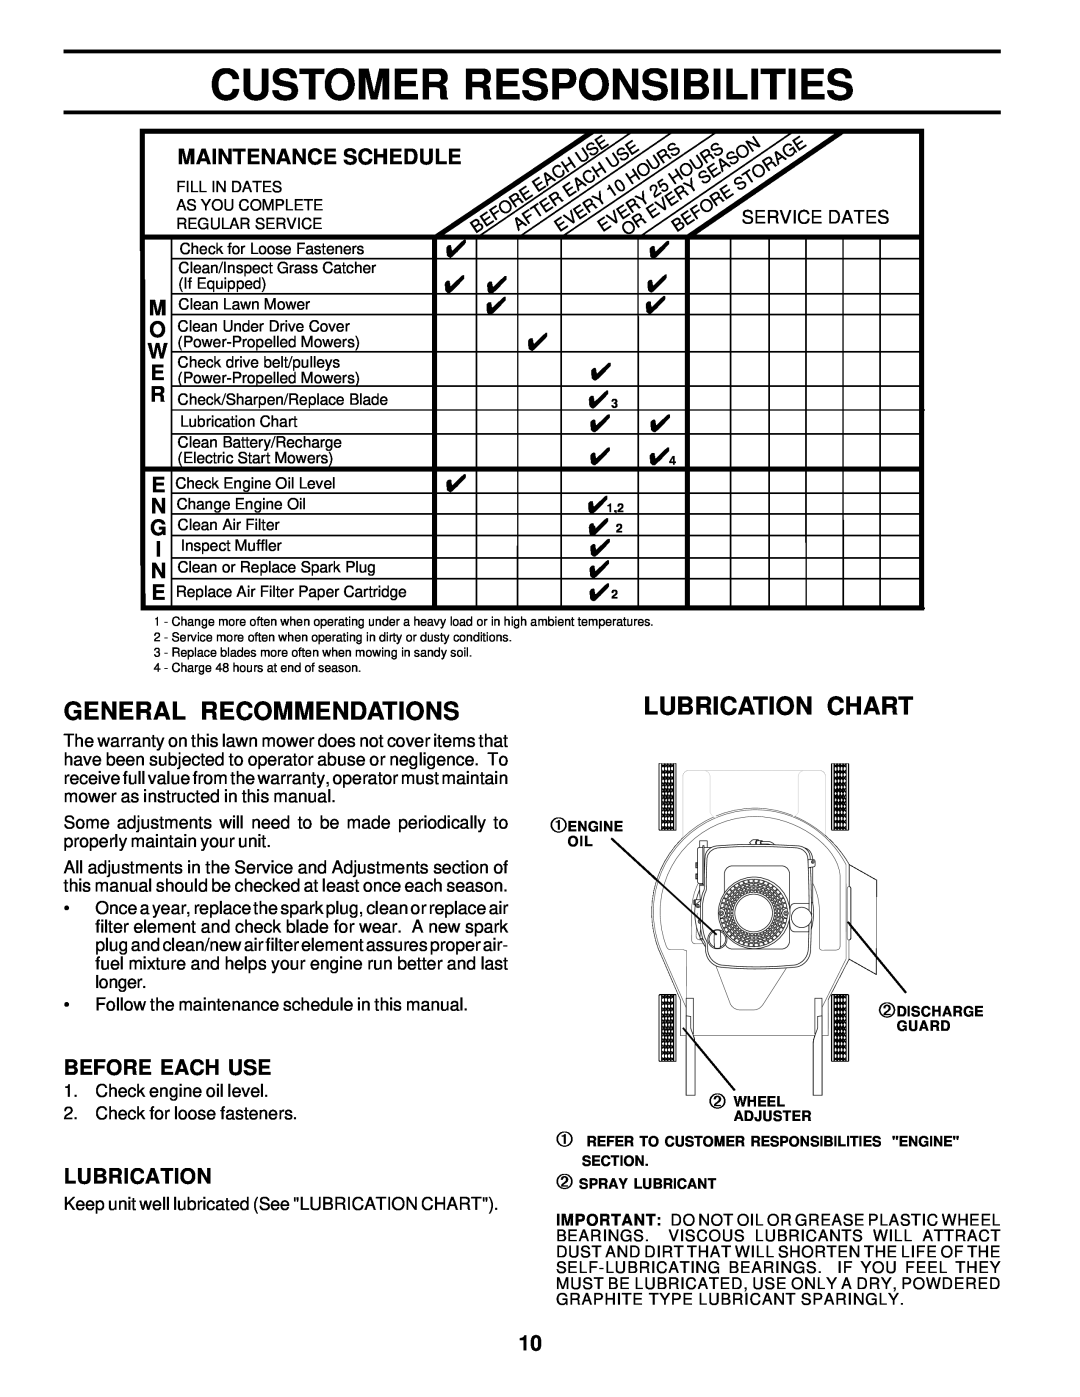 Husqvarna 6022CH owner manual Customer Responsibilities, General Recommendations, Lubrication Chart, Maintenance Schedule 